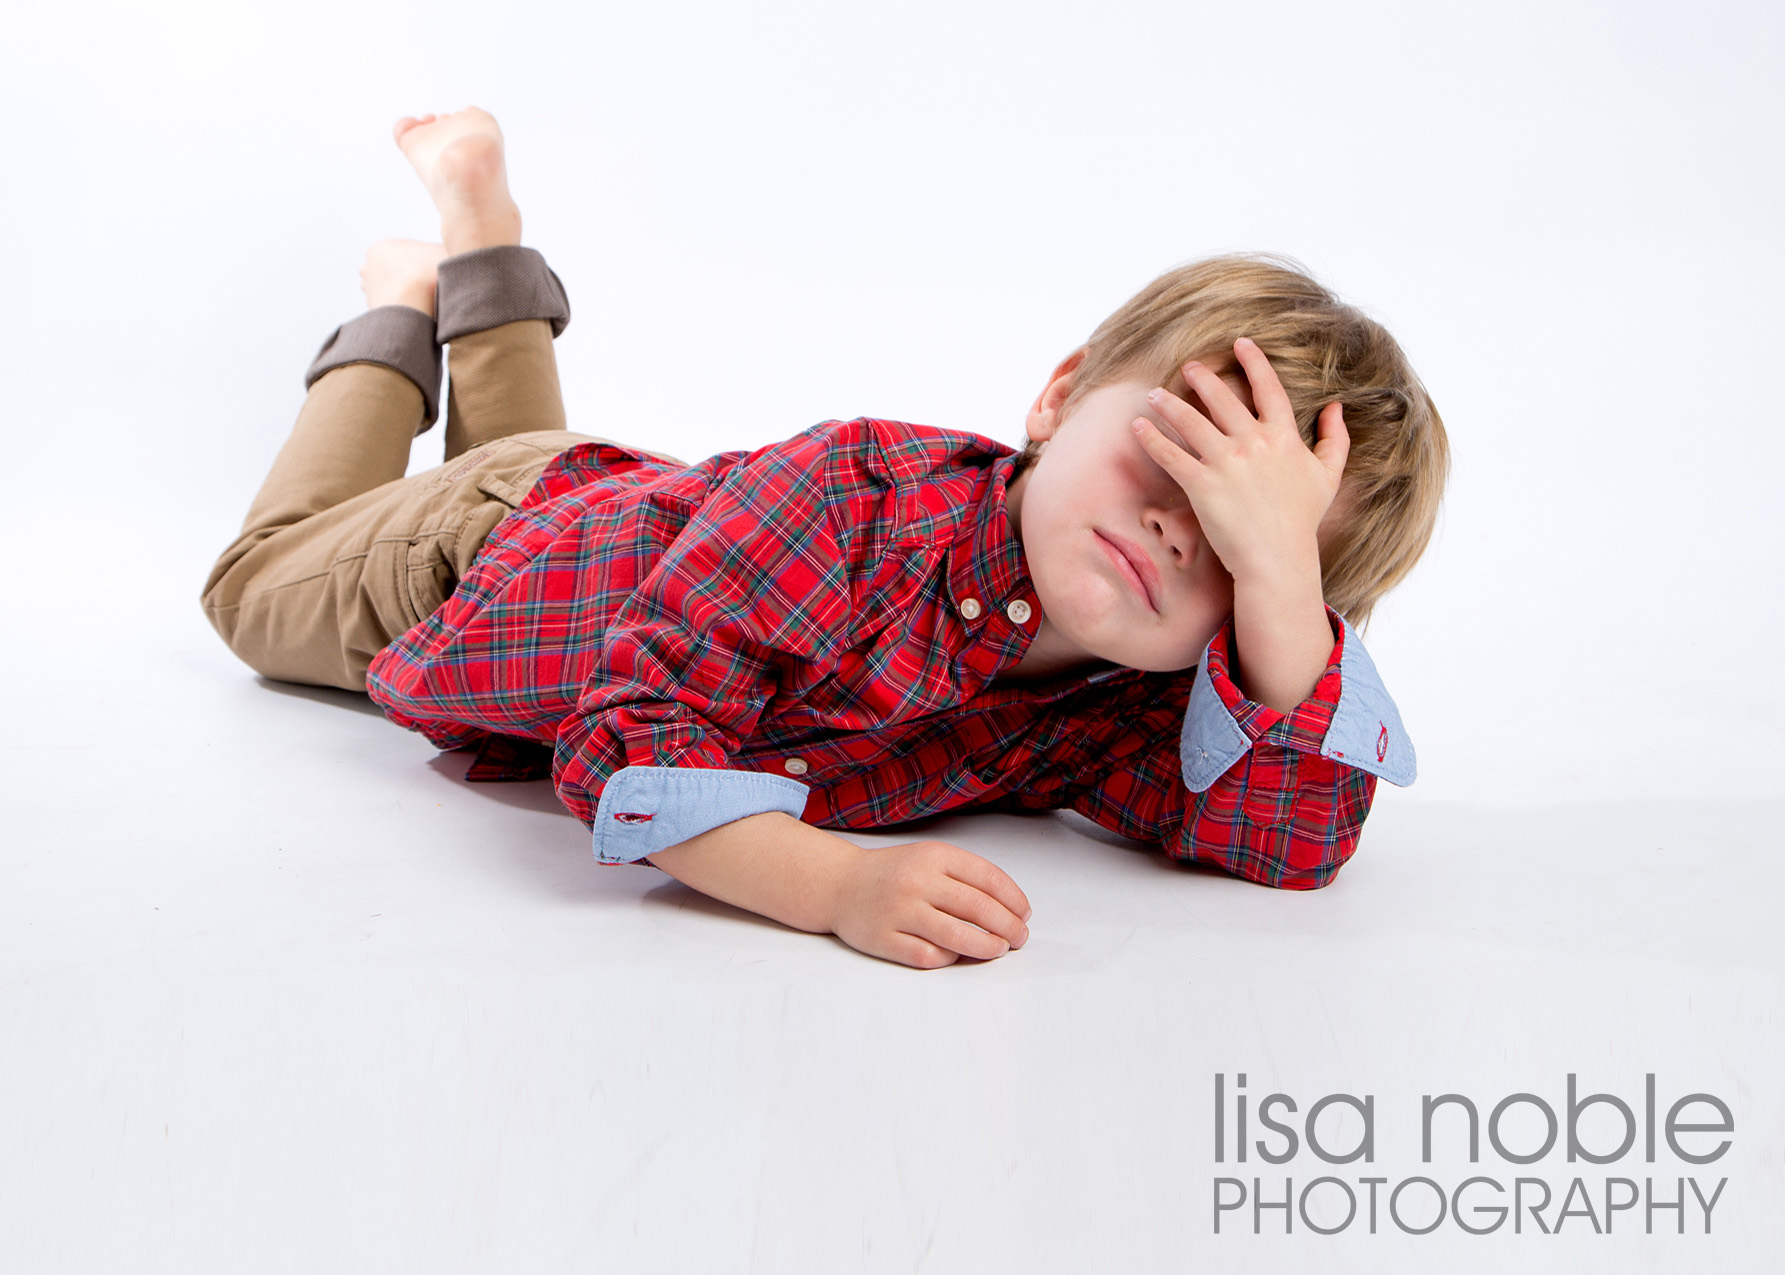 Photographic portraits of kids by Bay Area Professional Family Photographer